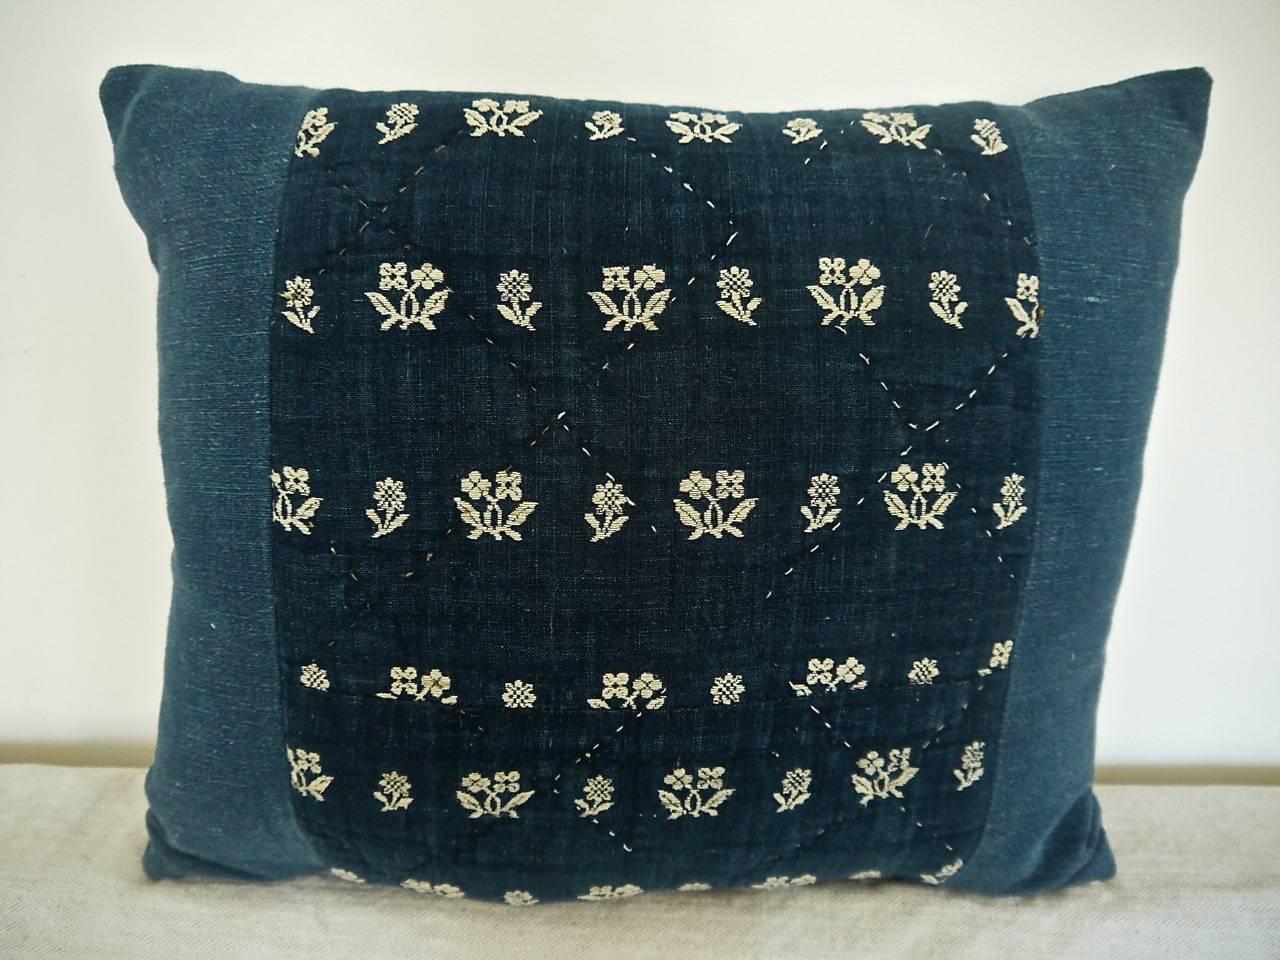 Late 18th century French wool woven on indigo linen cushion.
Rare to find this textile, also called cambresene, on an indigo ground, usually the wool floral motif is on a white linen. Simple and beautiful design. Cushion quilted with a diamond